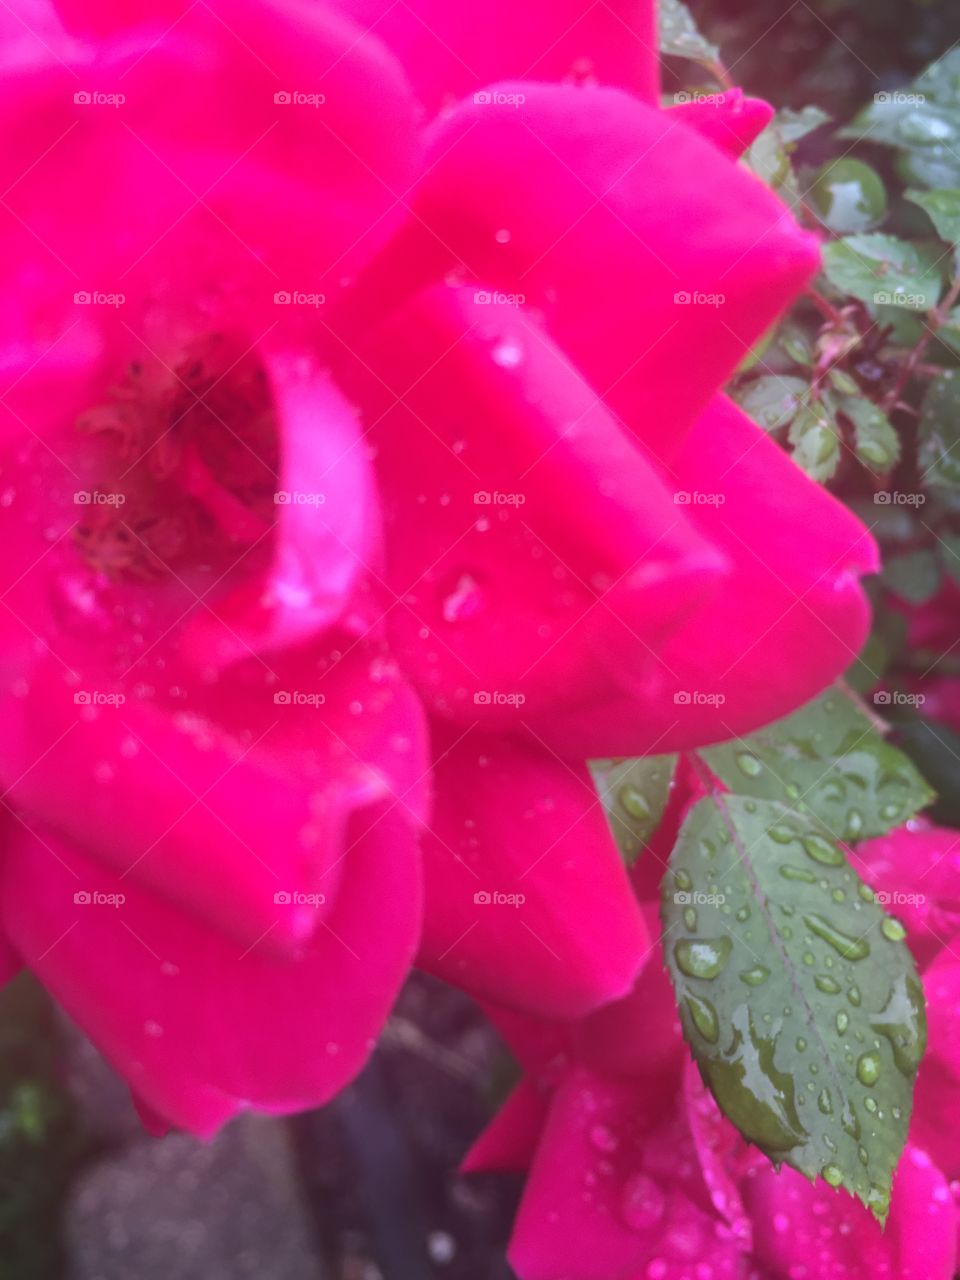 Red and pink roses in front of greenery on rainy day.